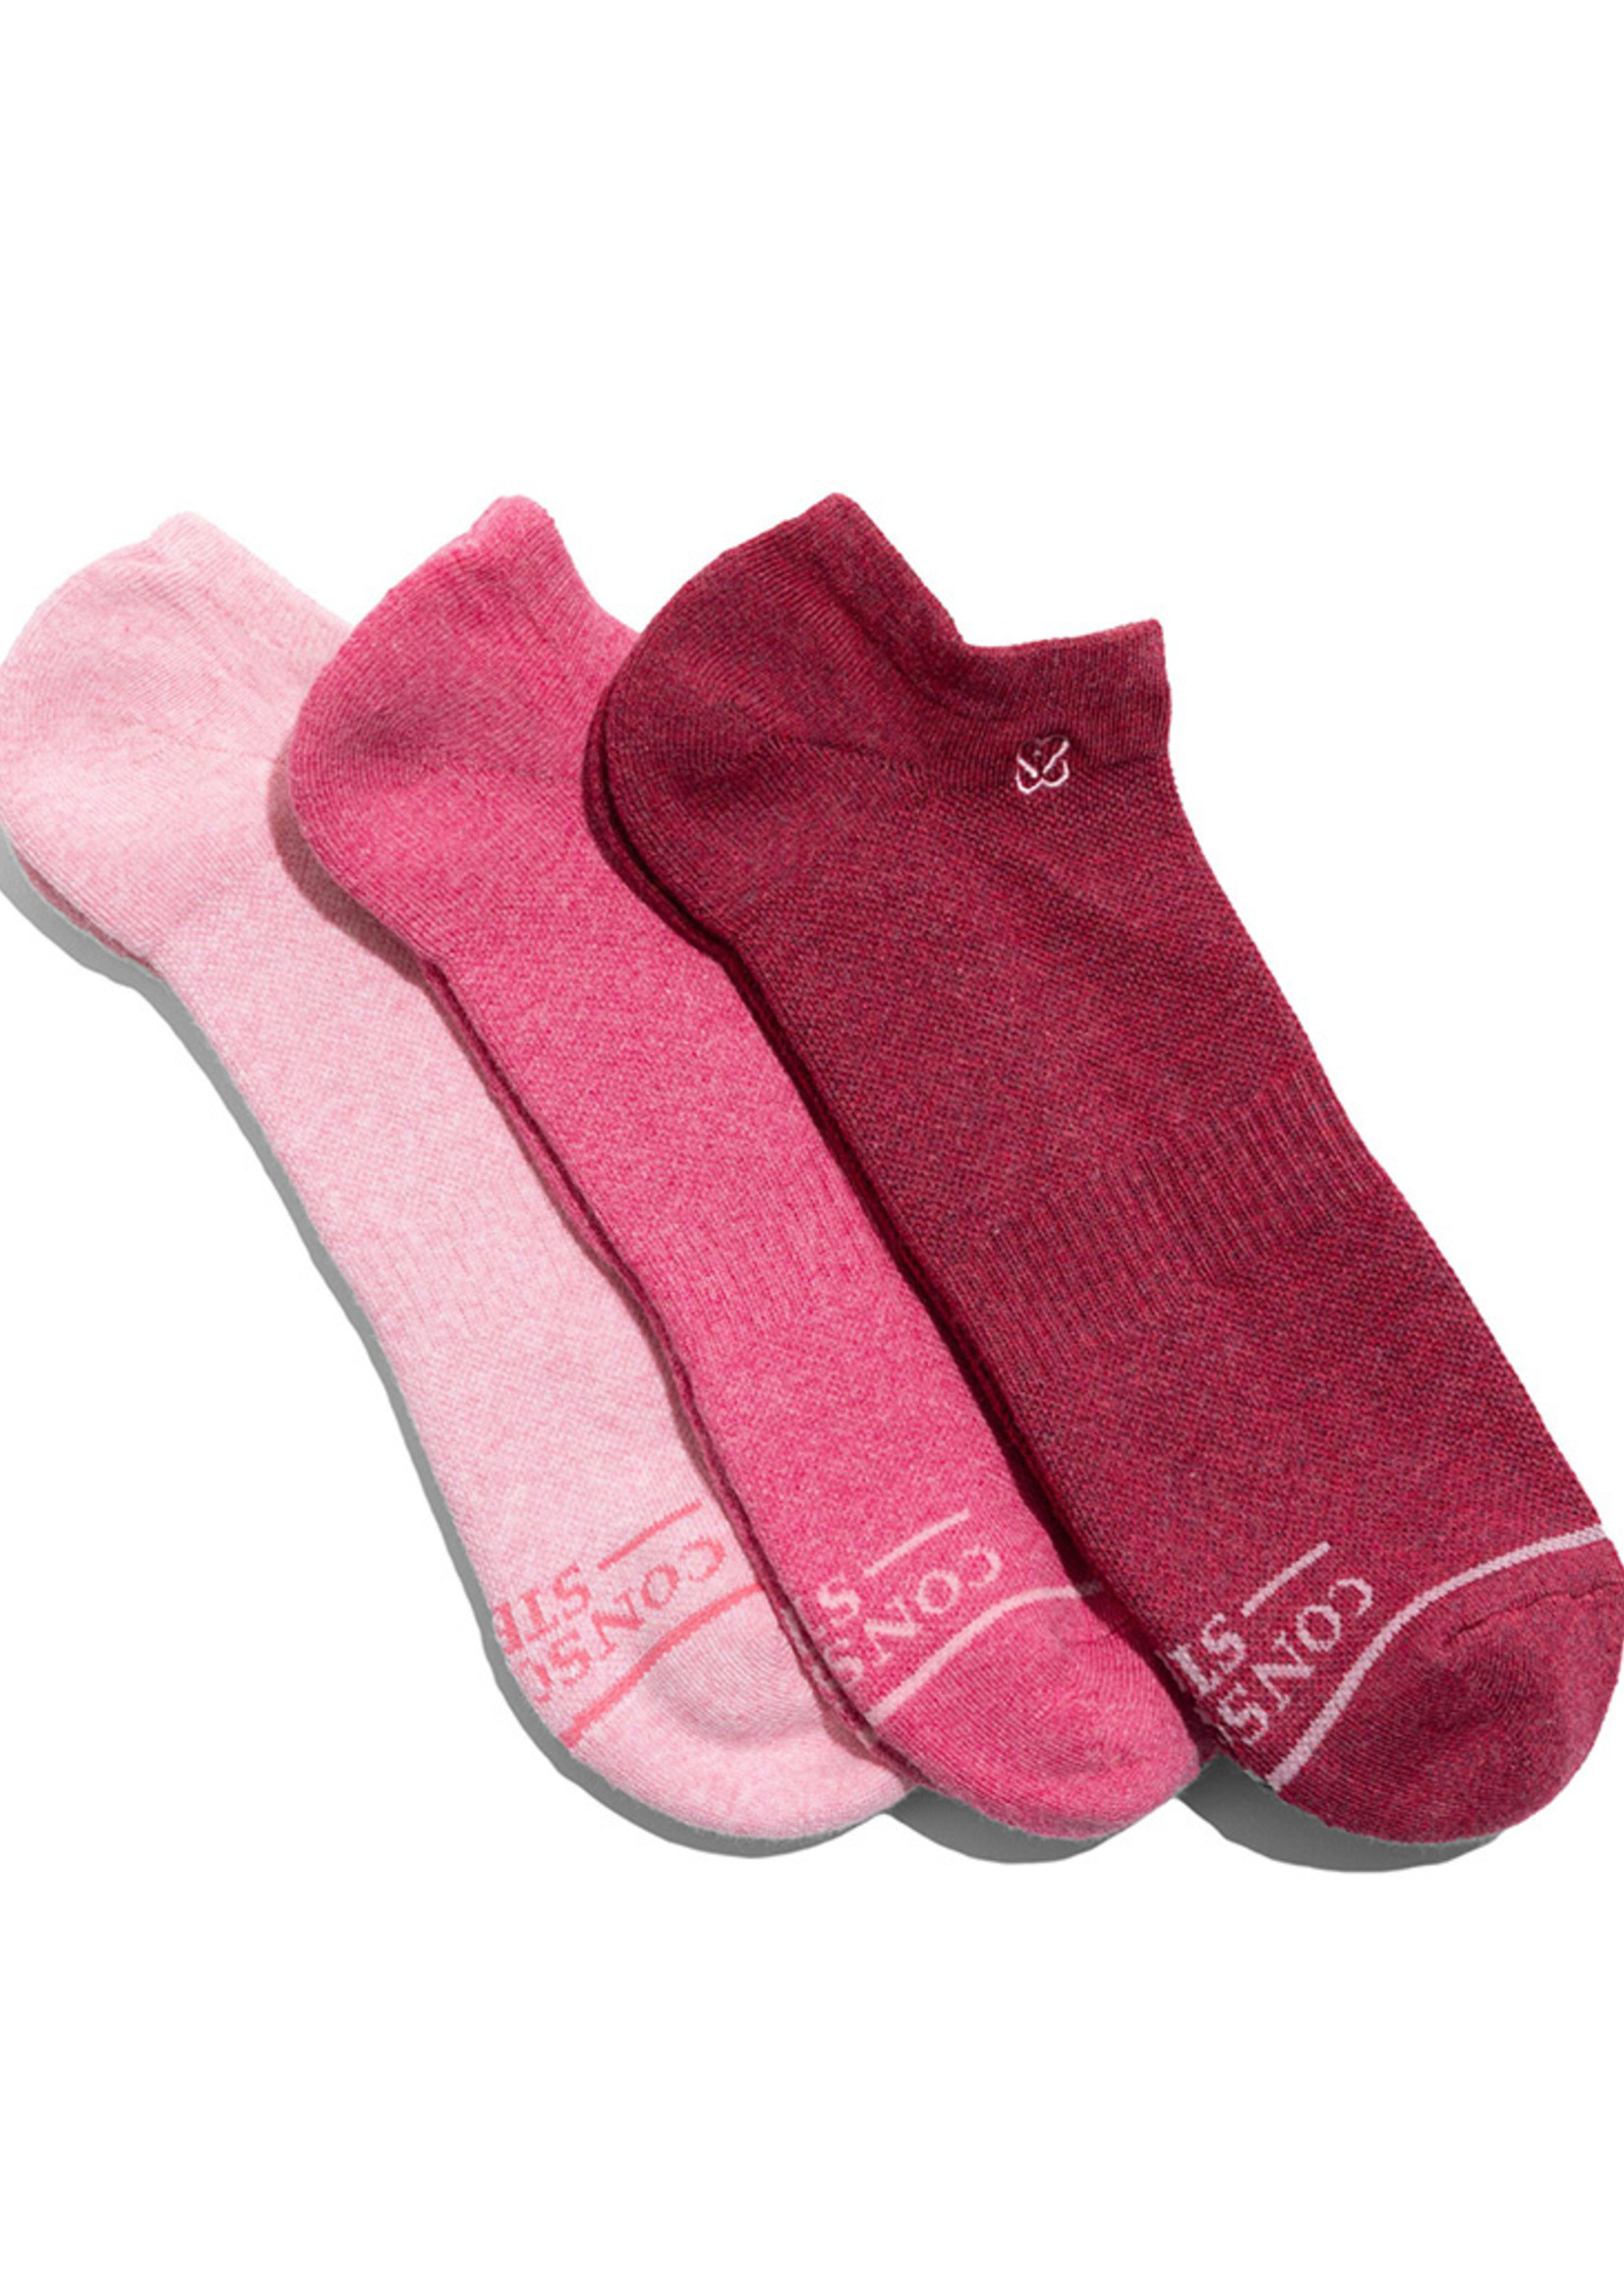 Conscious Step Women's Box of Socks That Prevent Breast Cancer